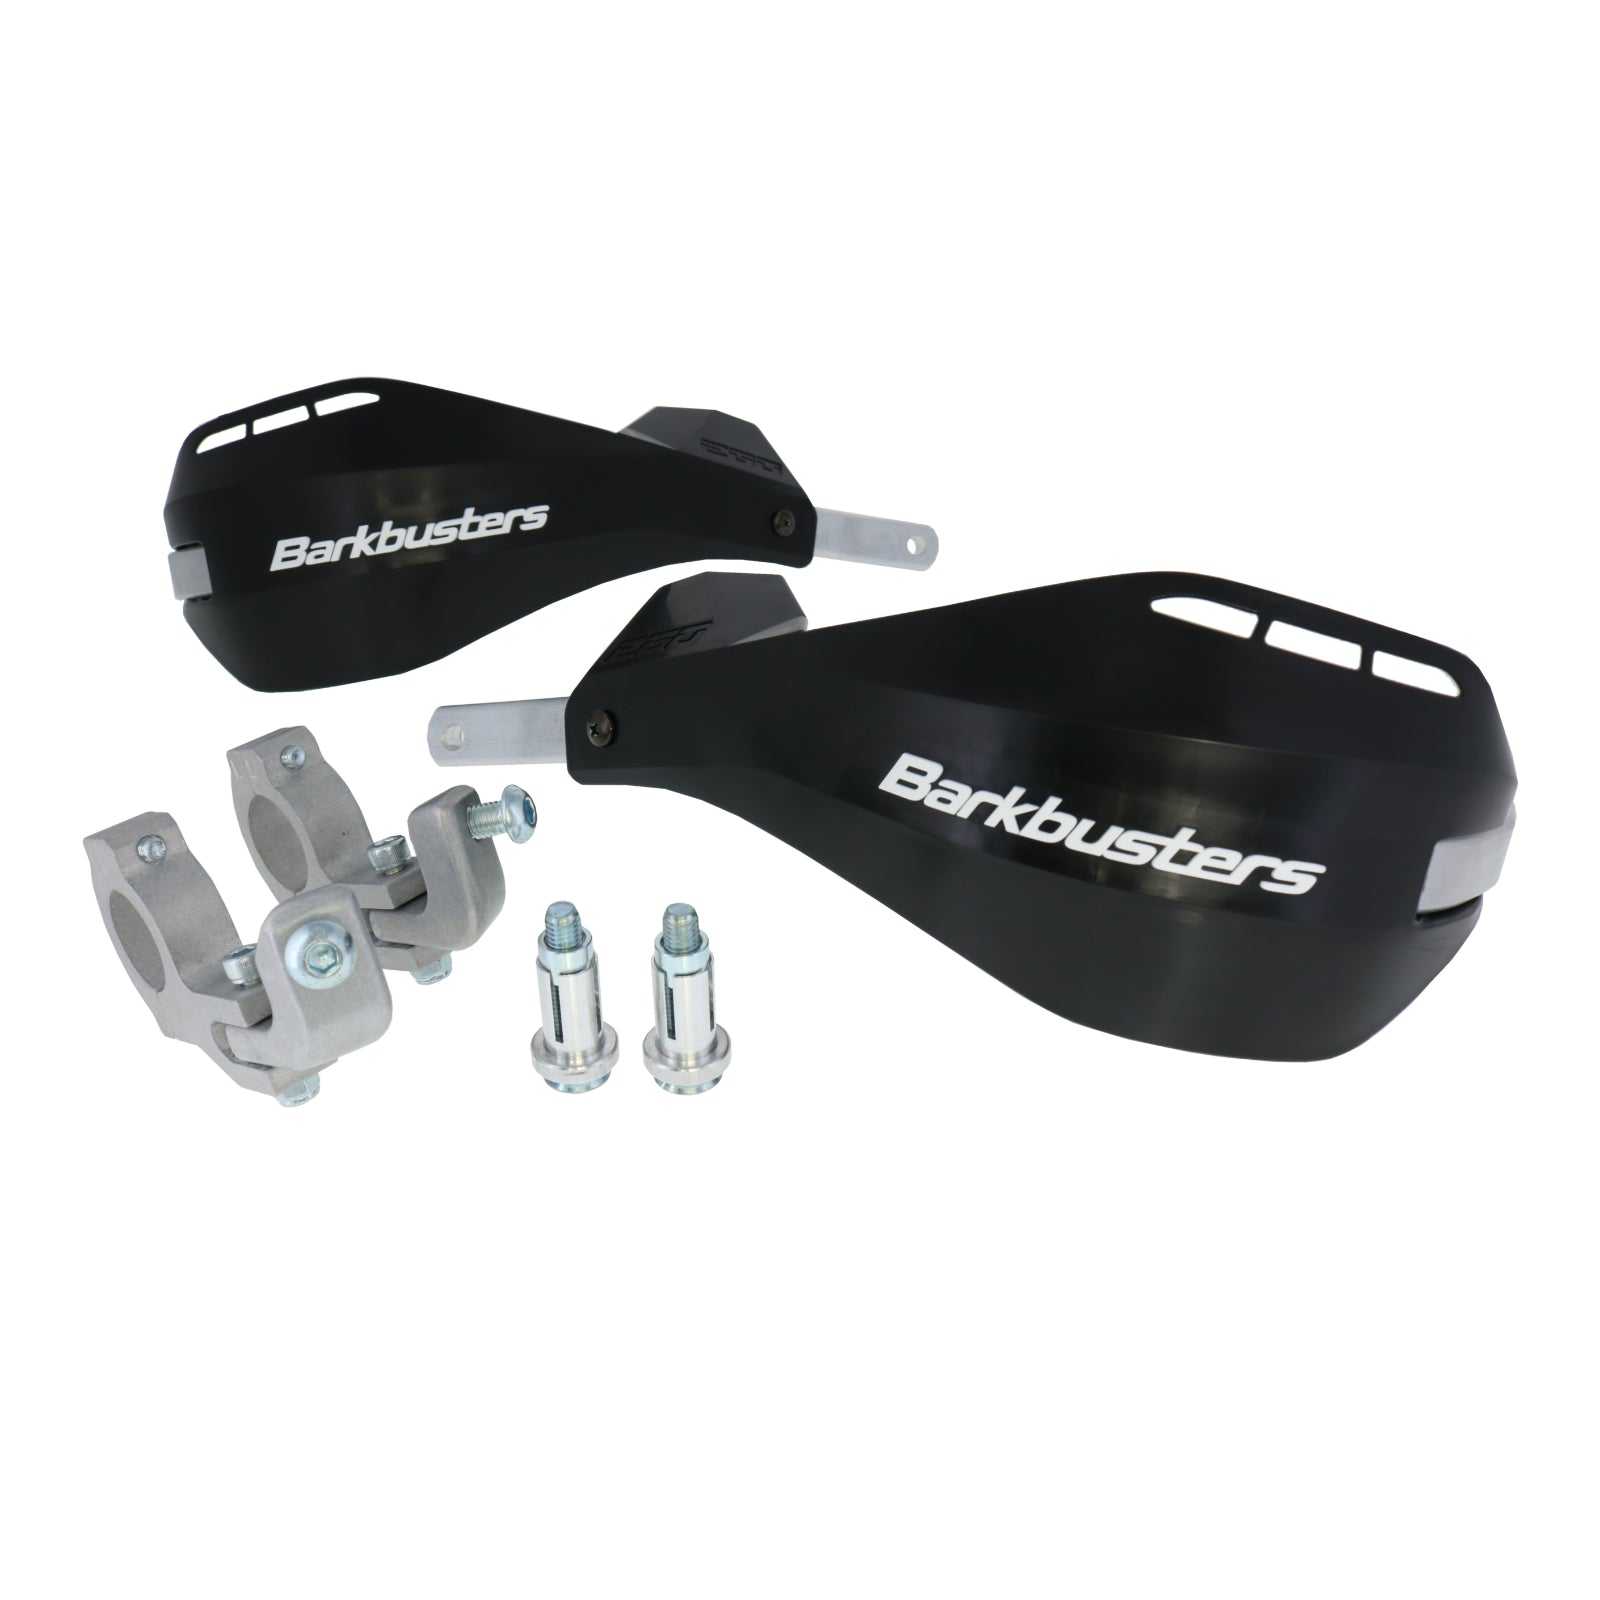 Barkbusters, Barkbusters Ego Handguard  with Multi Fit Clamps - Black / Black